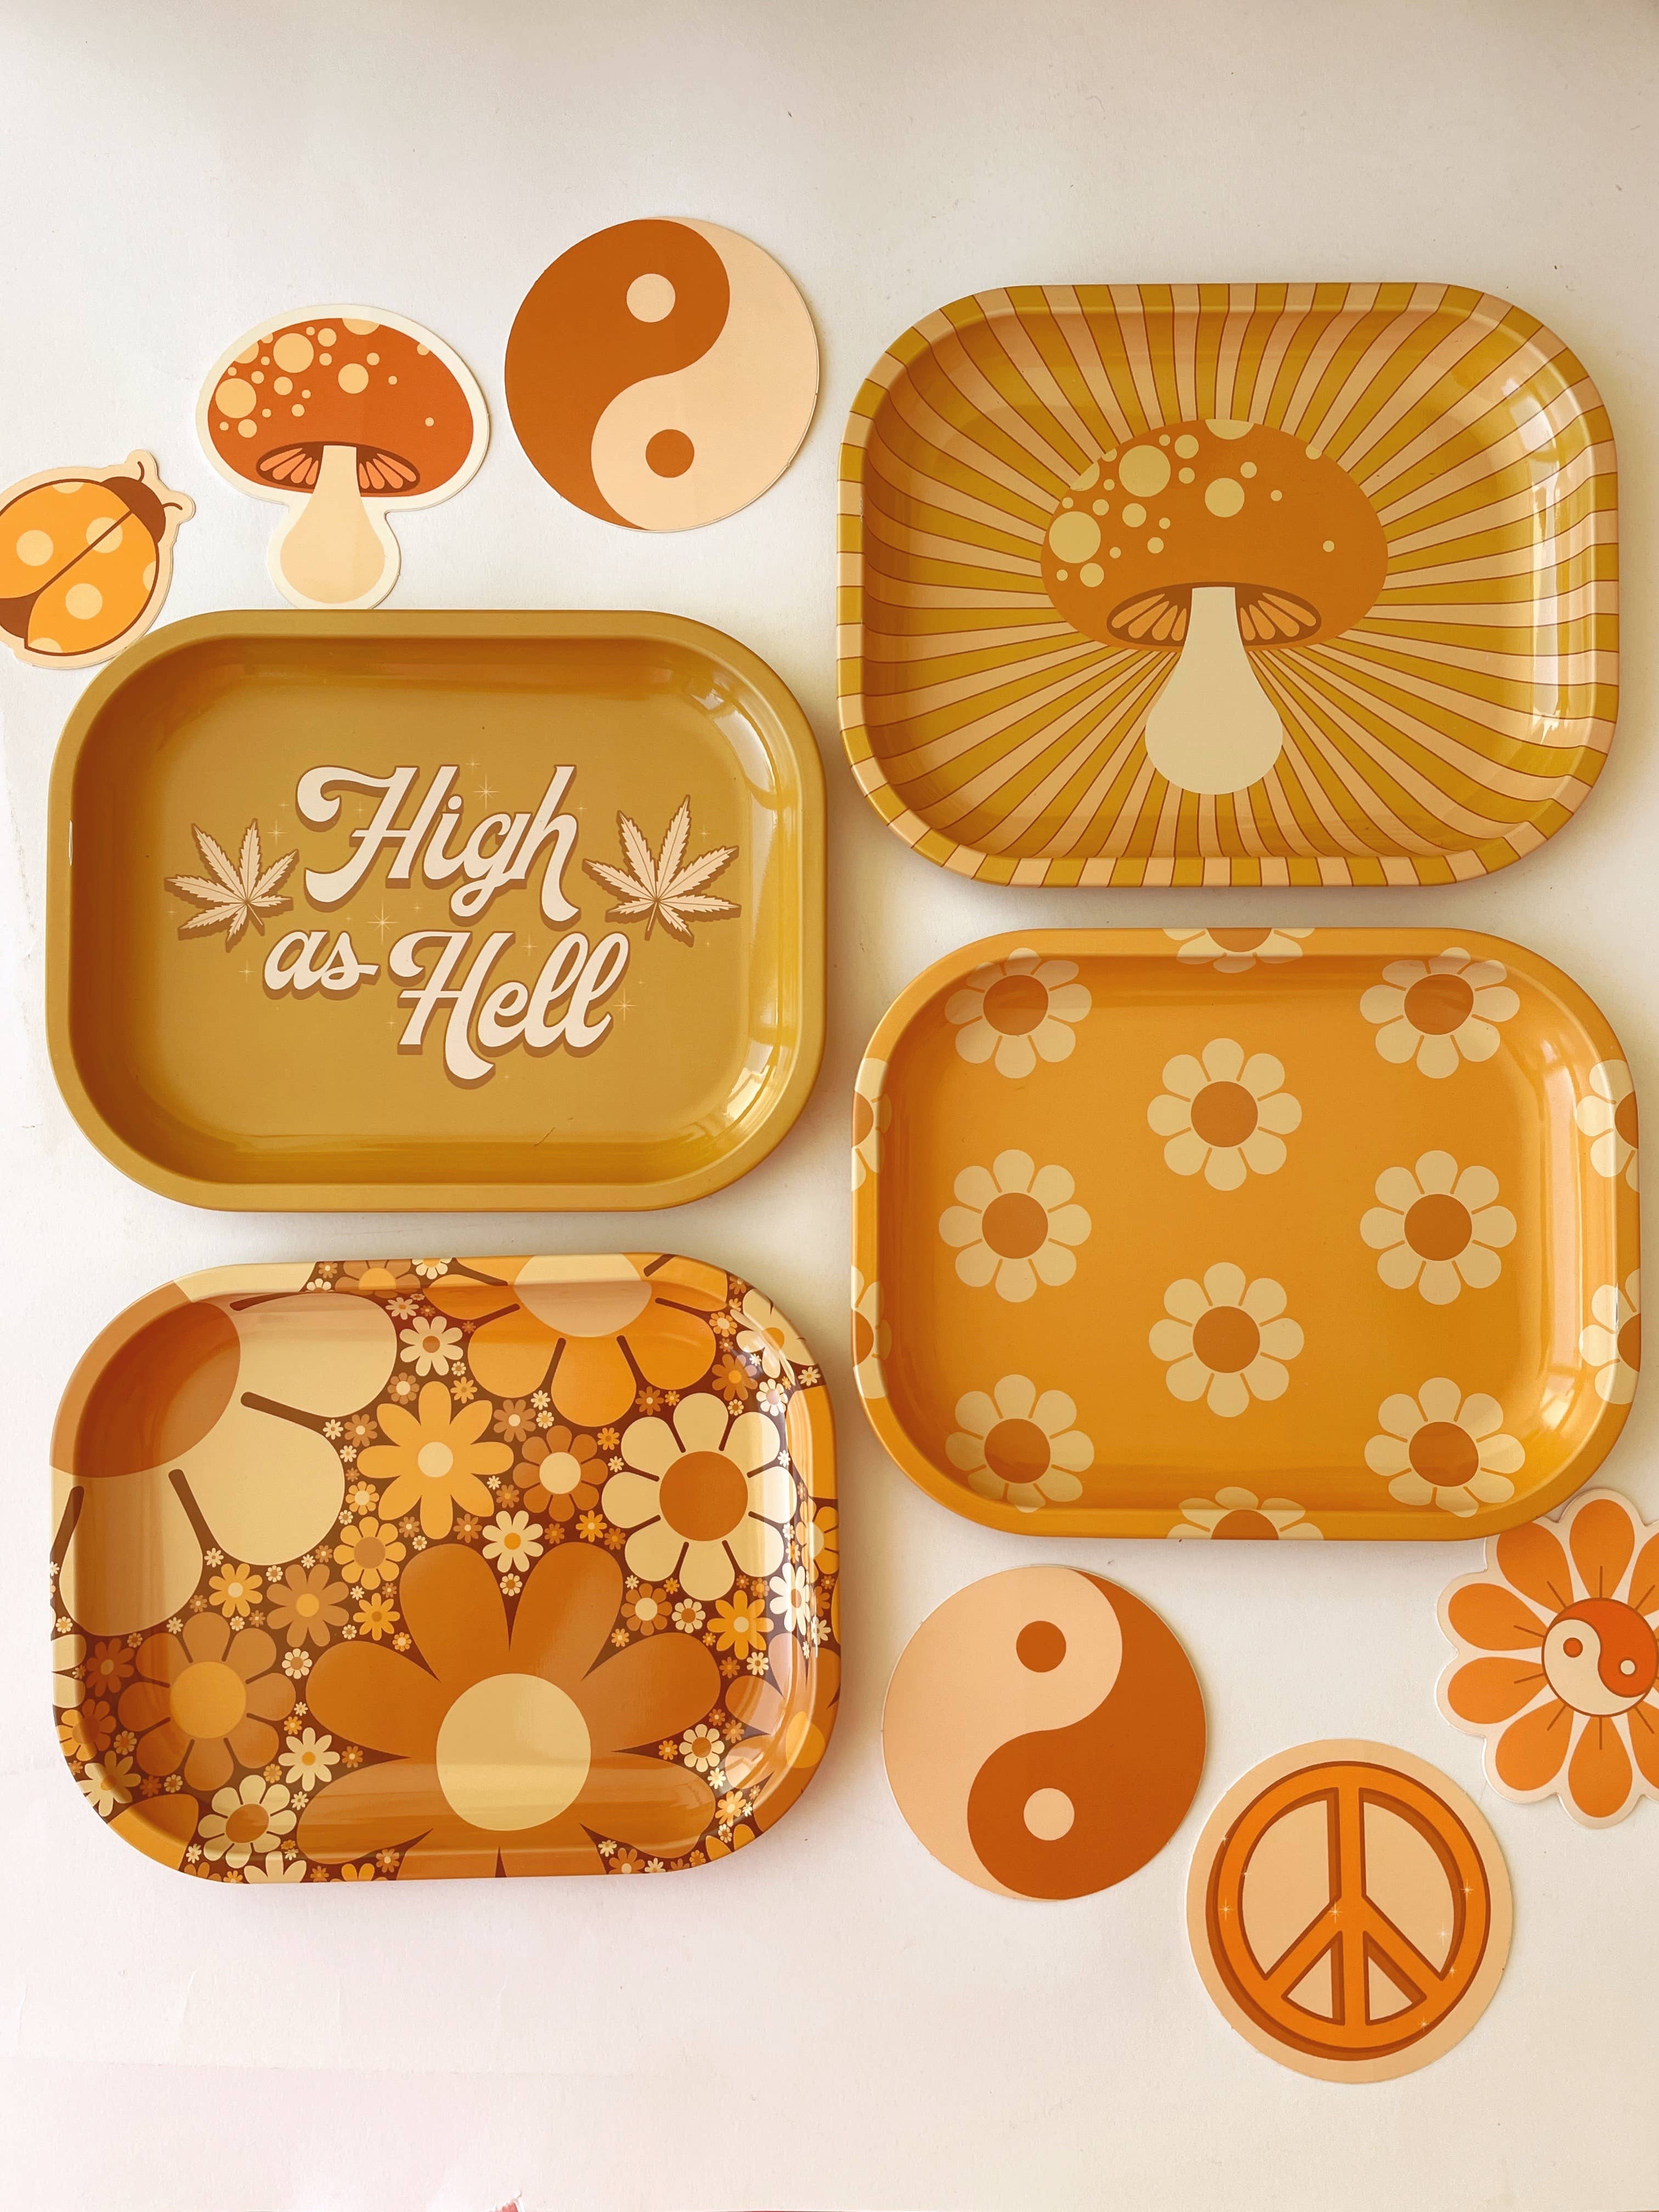 70's Floral Metal Tray - Out of the Blue